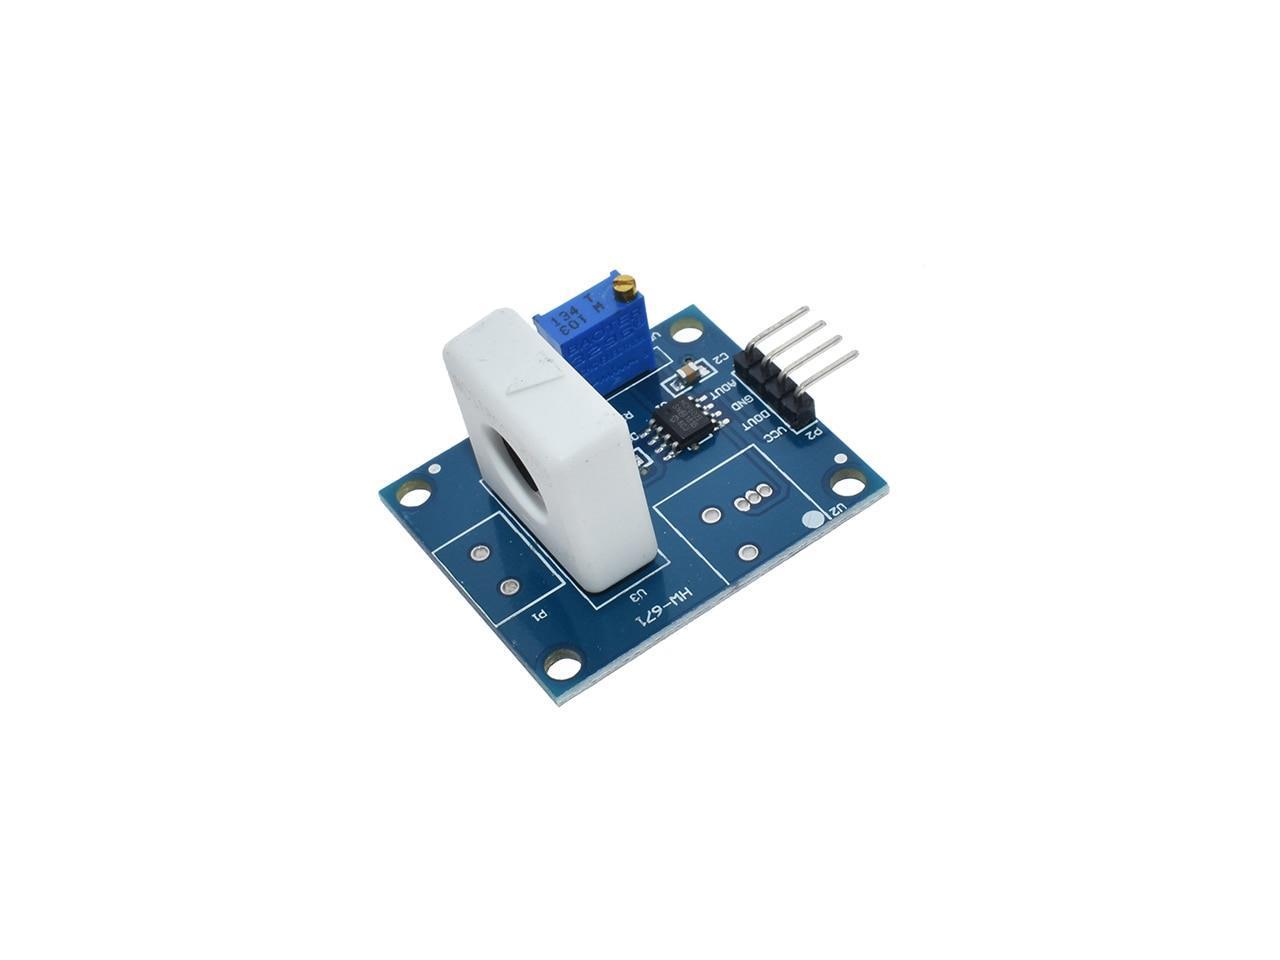 Details about   DC 5V WCS1800 Hall Current Detection Sensor Module 35A Precise With Overcurrent